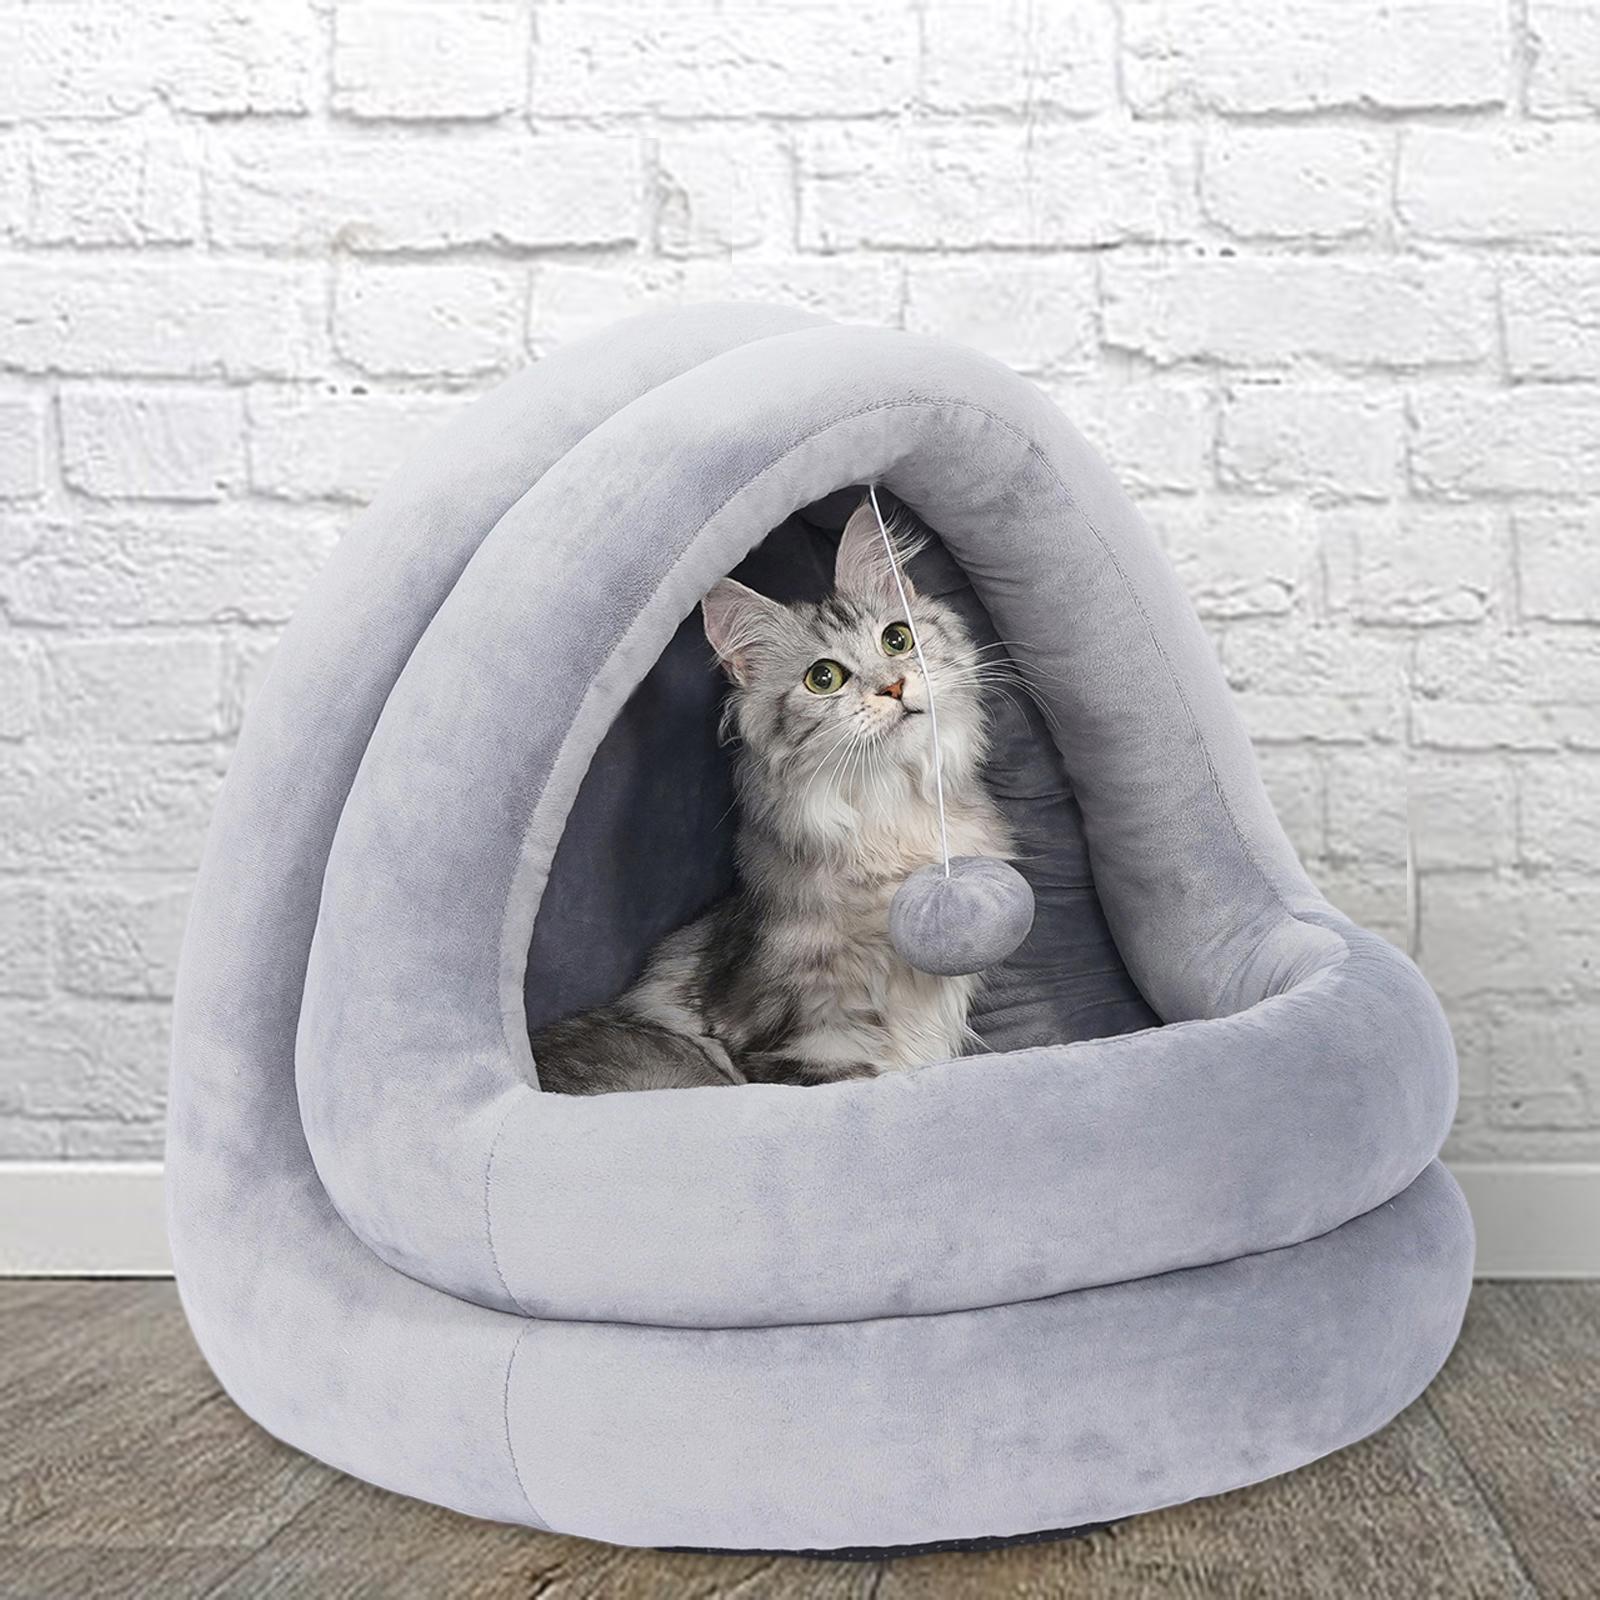 Cat Nest Washable Indoor Kennel Cat Bed Cave for Chihuahua Poodle Pomeranian